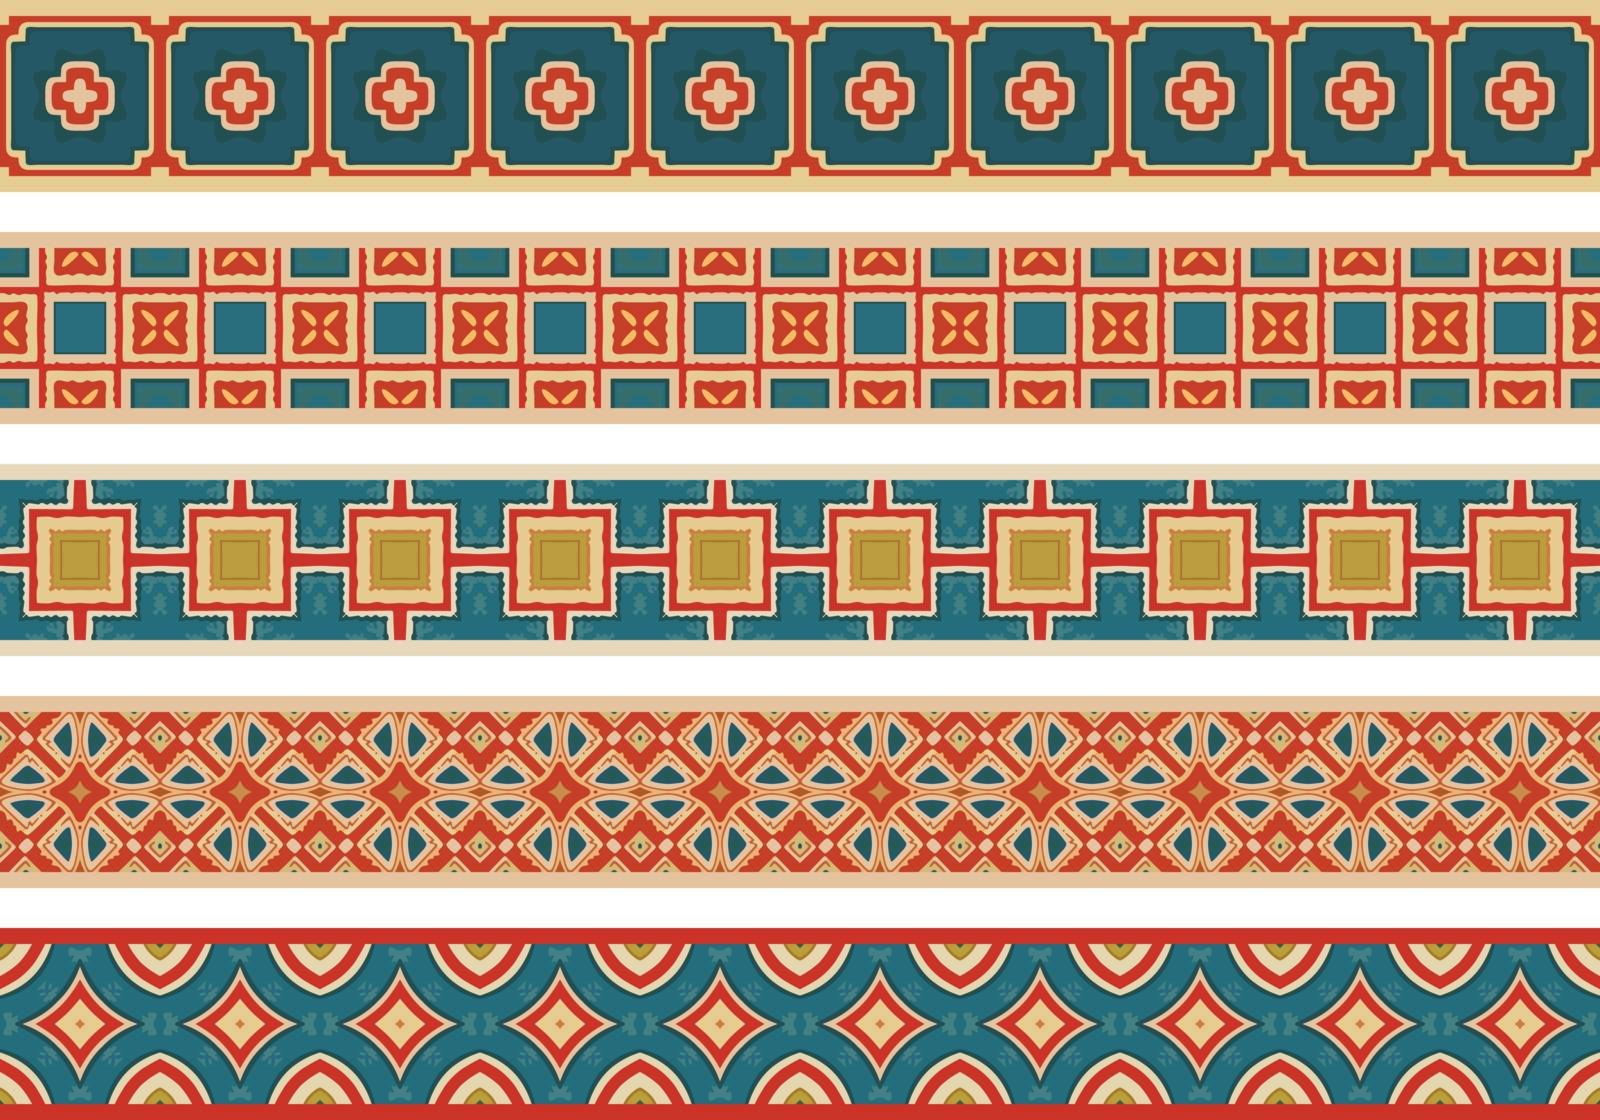 Set of five illustrated decorative borders made of abstract elements in beige, red, turquoise and yellow